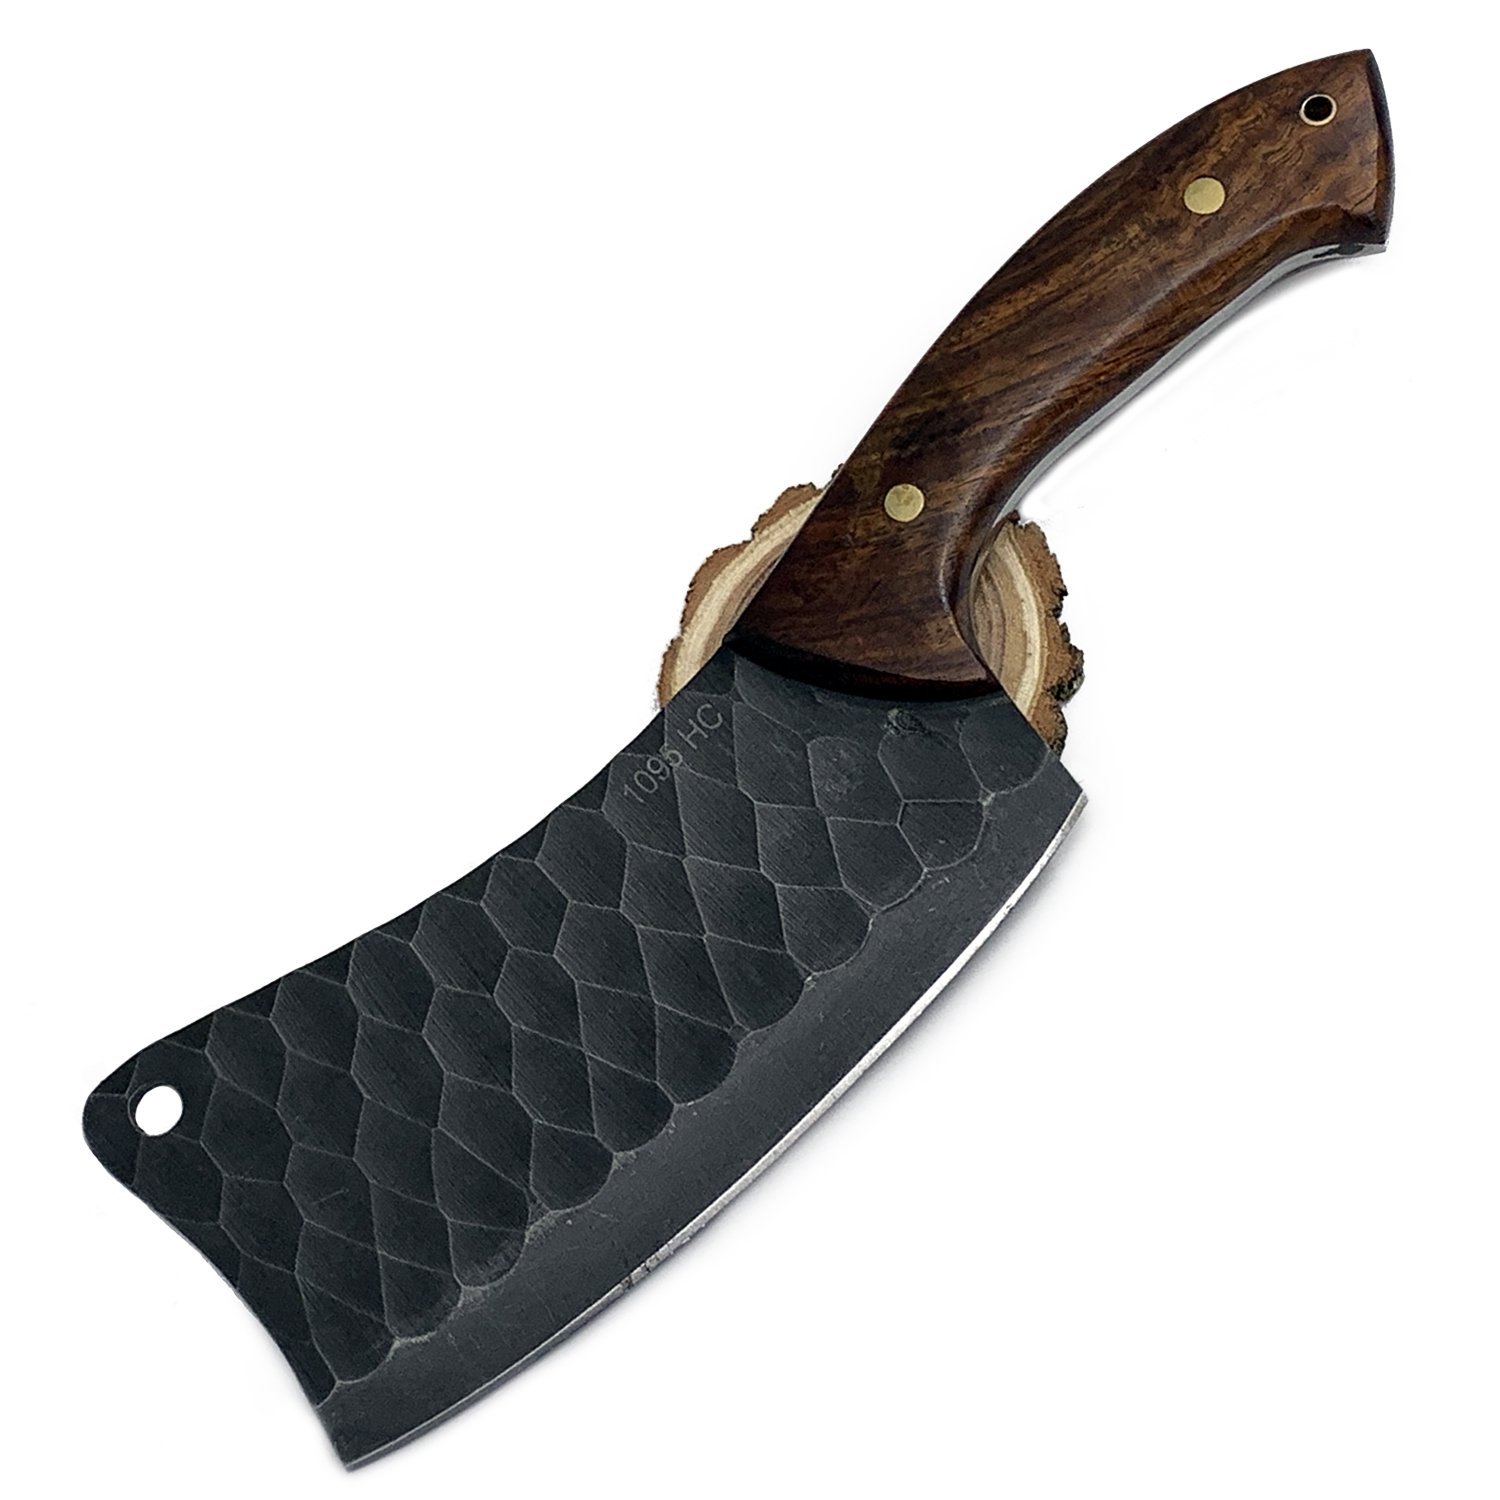 Hardwood Handle 12 inch Meat Cleaver with 1095 High Carbon Steel Full Tang Blade